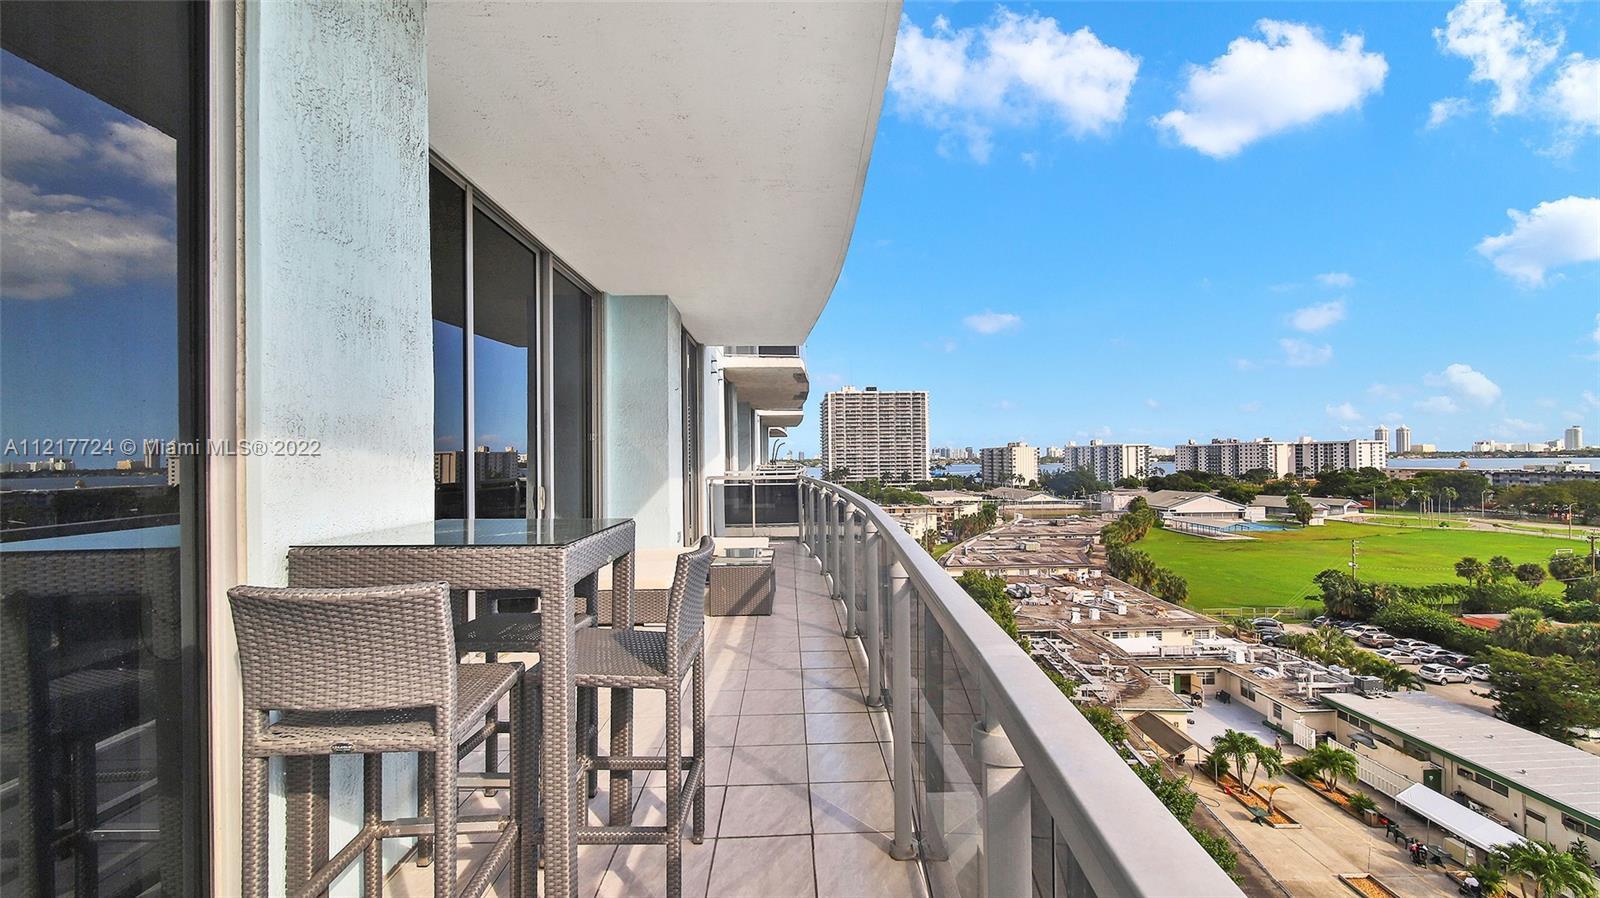 Enjoy the open Bay view and fresh breeze from this extra-large 2BR + Den (1,735 sqft) unit. Large ba